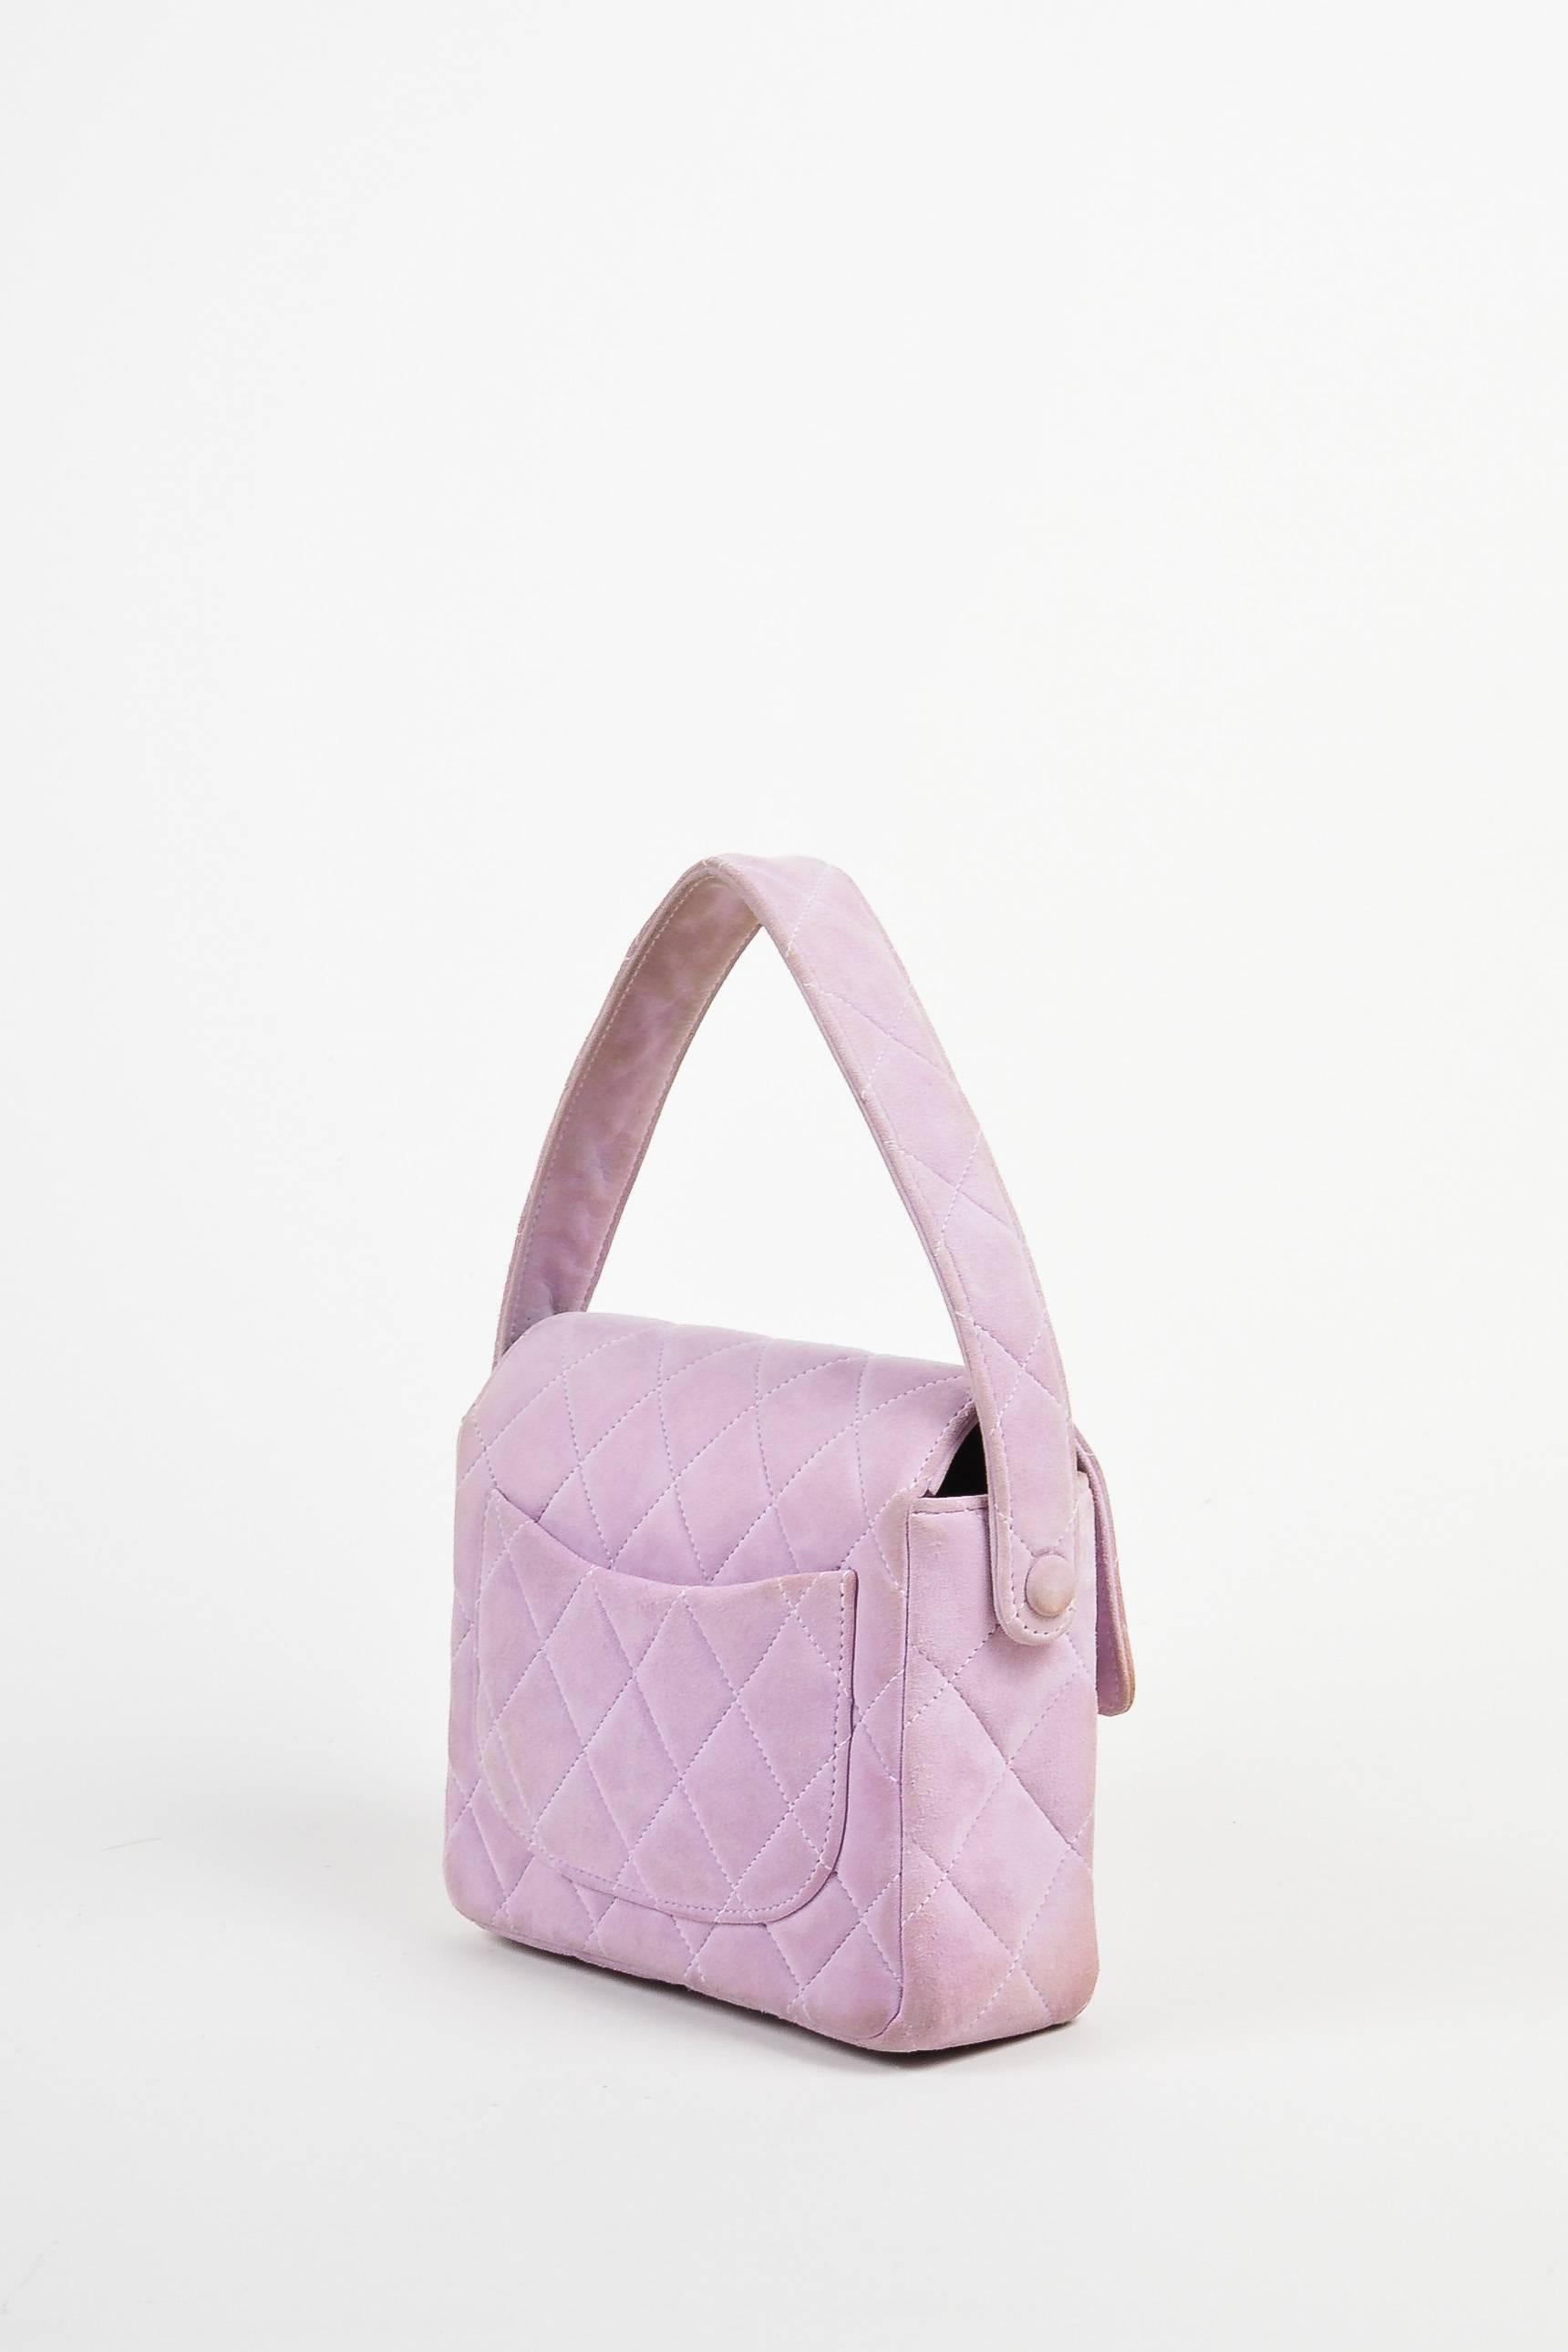 Comes with dust bag. Chic and eye-catching lavender purse from Chanel. Suede exterior with silver-tone hardware and a turn lock closure. Quilted design that is iconic of the brand. Small shape and size is great for everyday use. Will hold all of